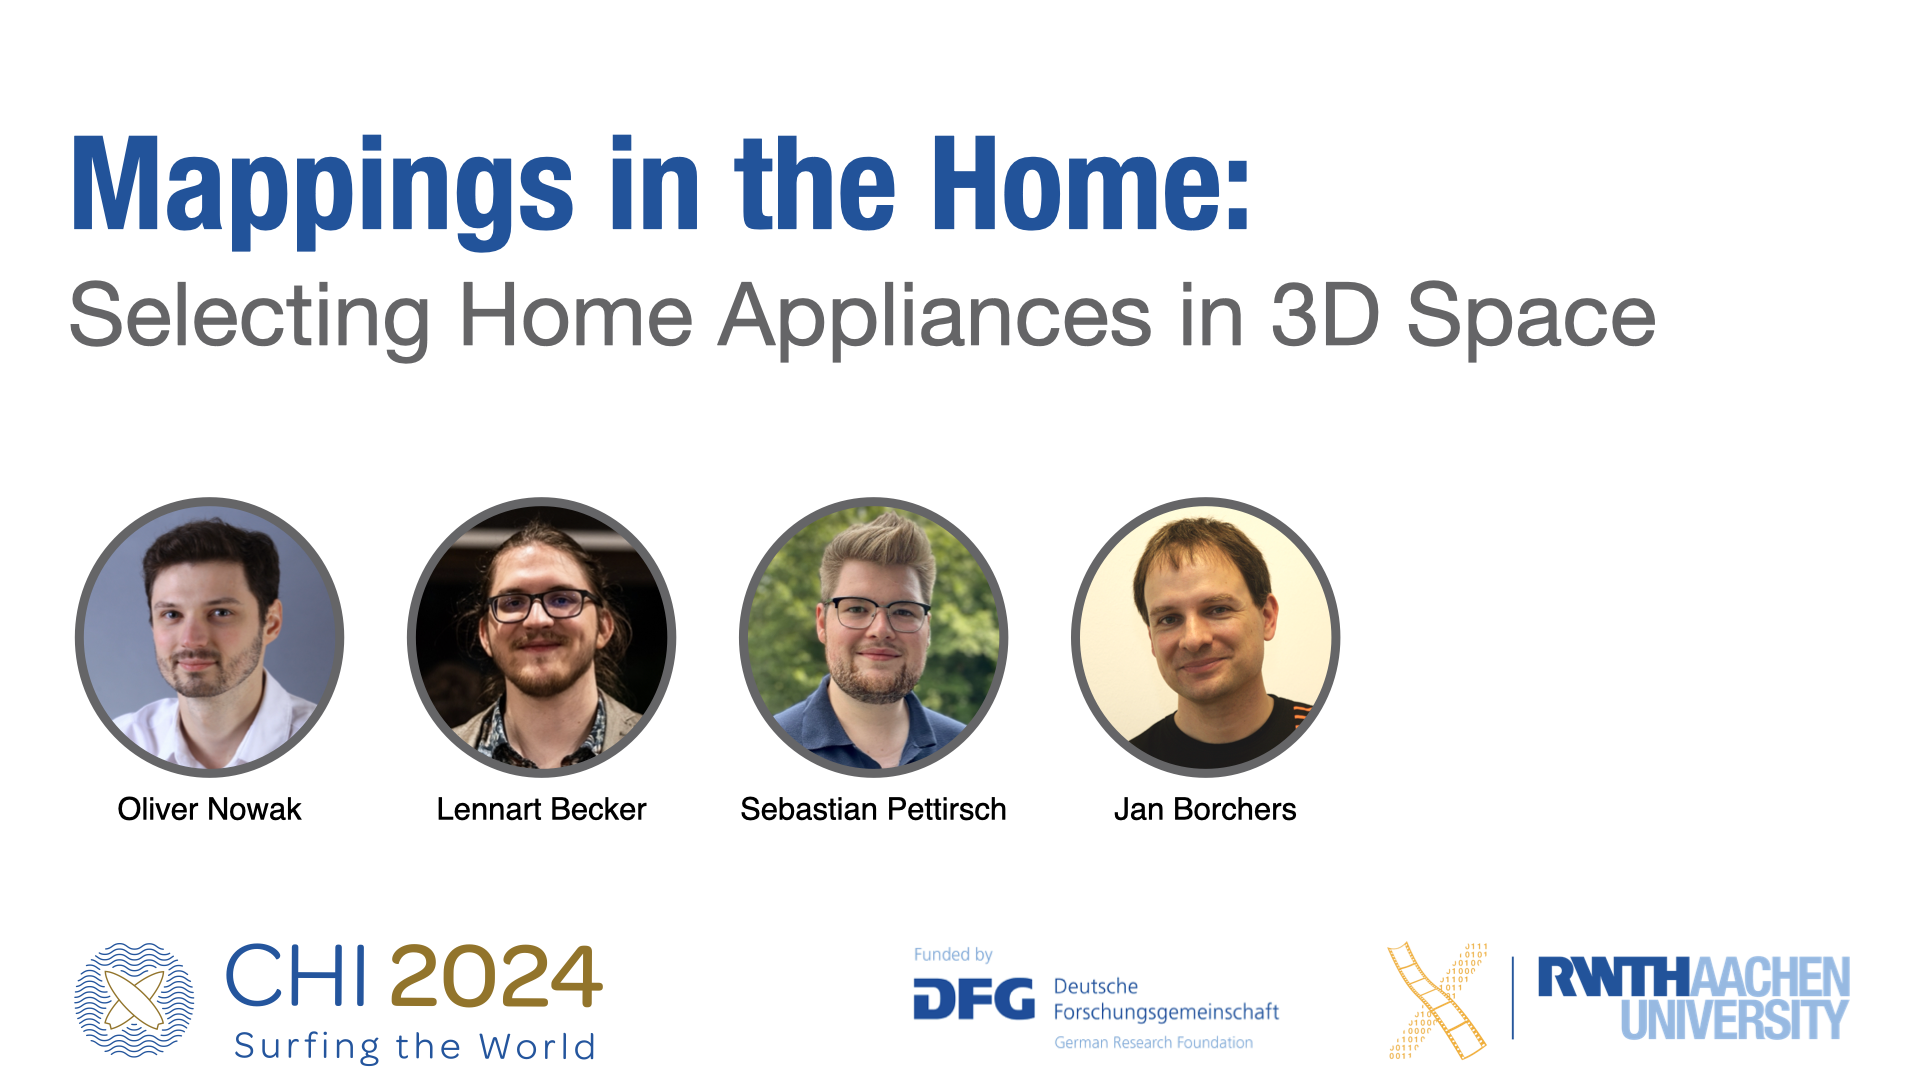 Mappings in the Home: Selecting Home Appliances in 3D Space